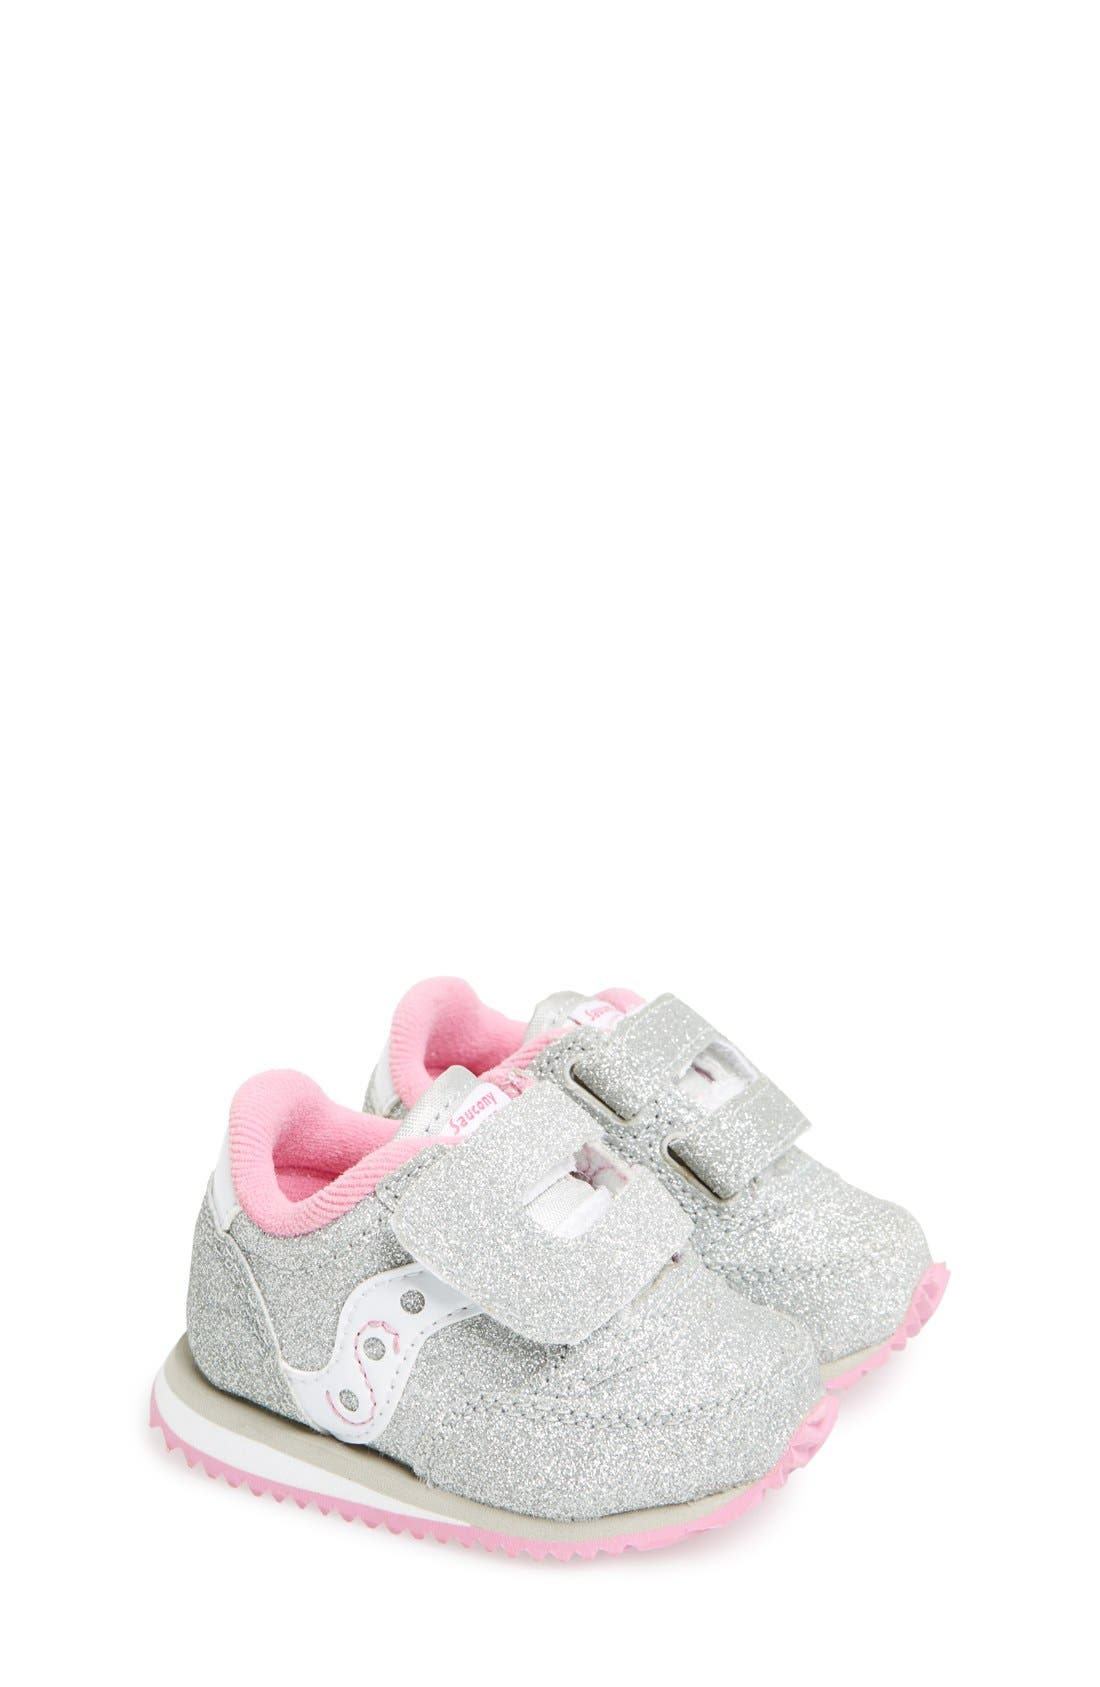 saucony shoes for baby